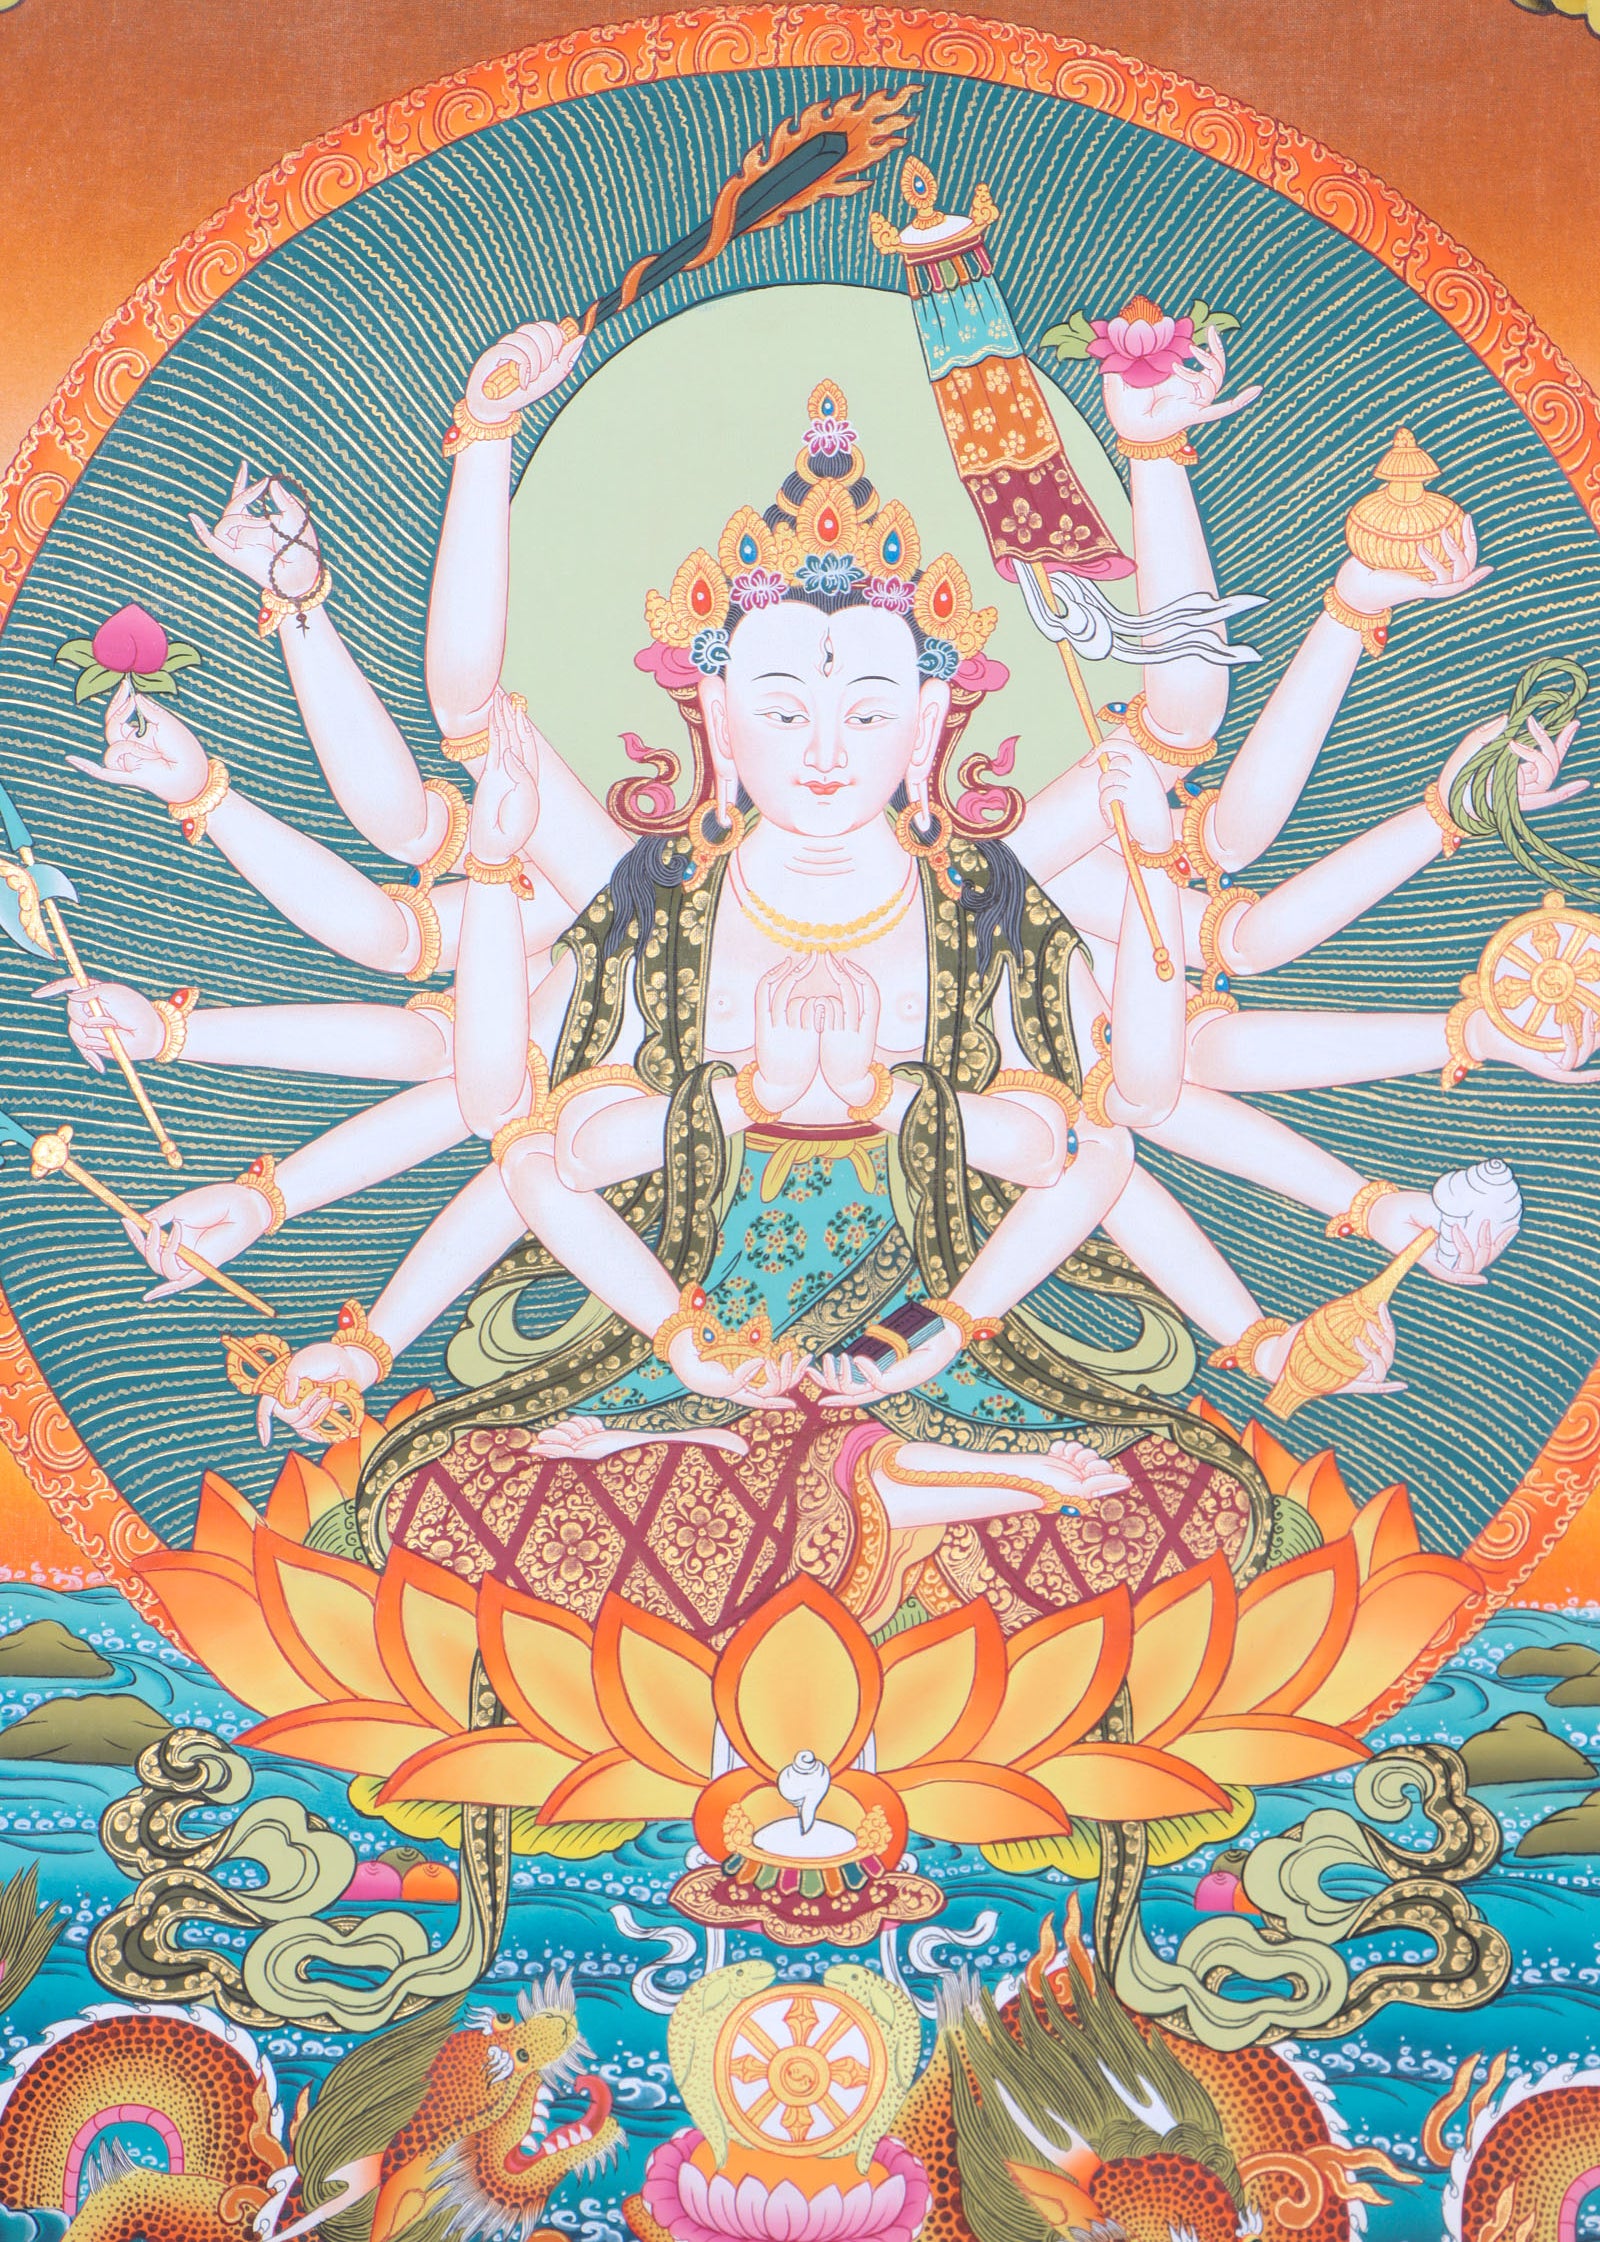 Chundi thangka for the qualities of enlightened wisdom and boundless compassion.